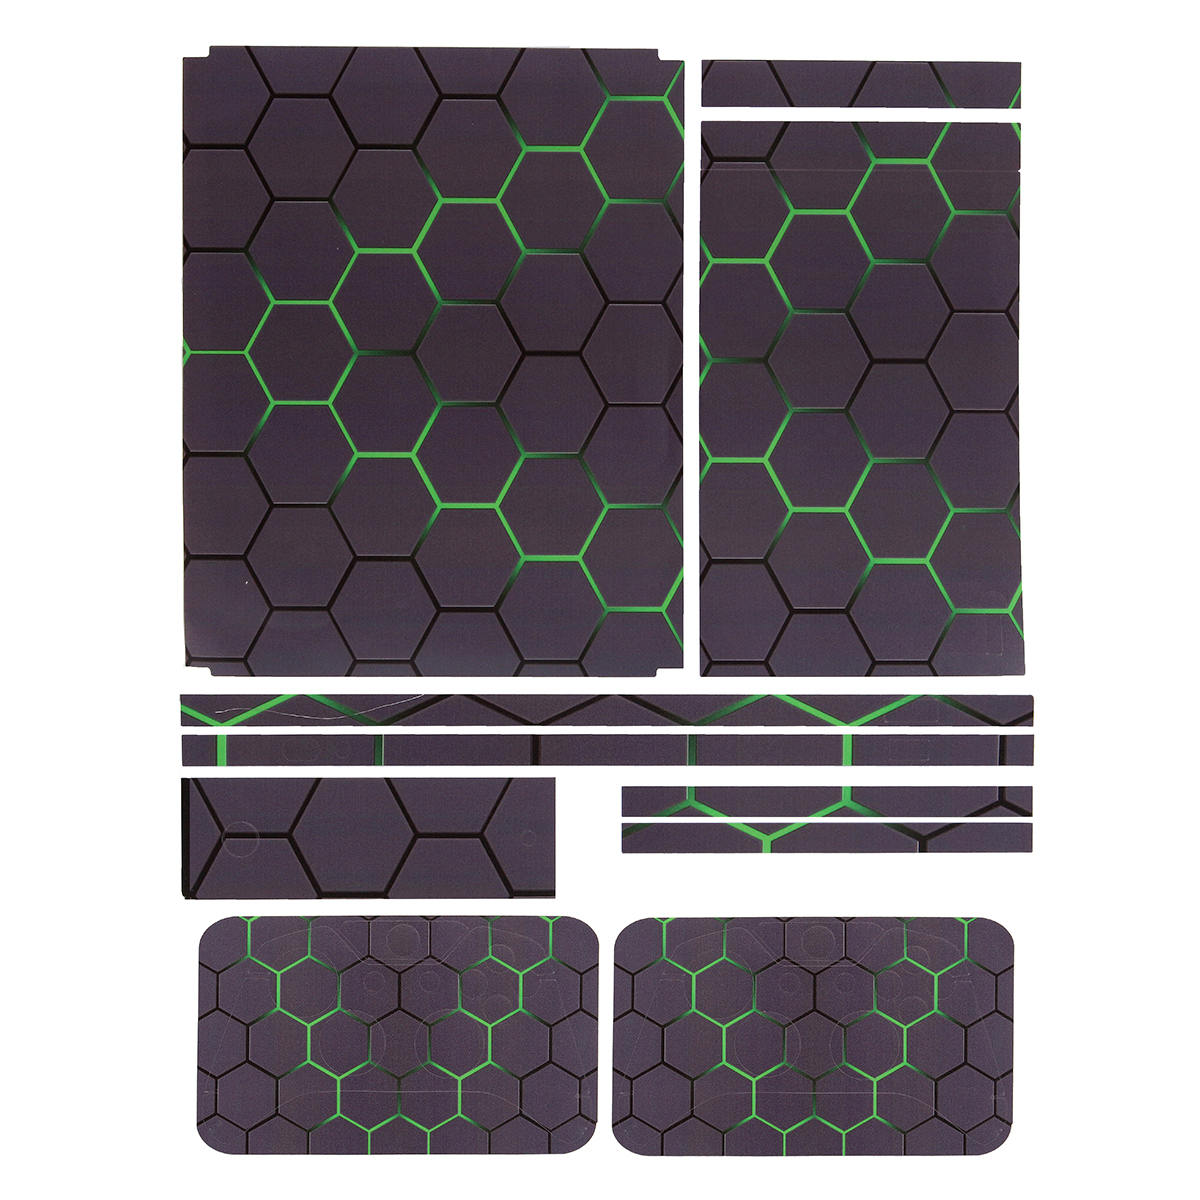 Green Grid Vinyl Decal Skin Stickers Cover for Xbox One S Game Console&2 Controllers 21